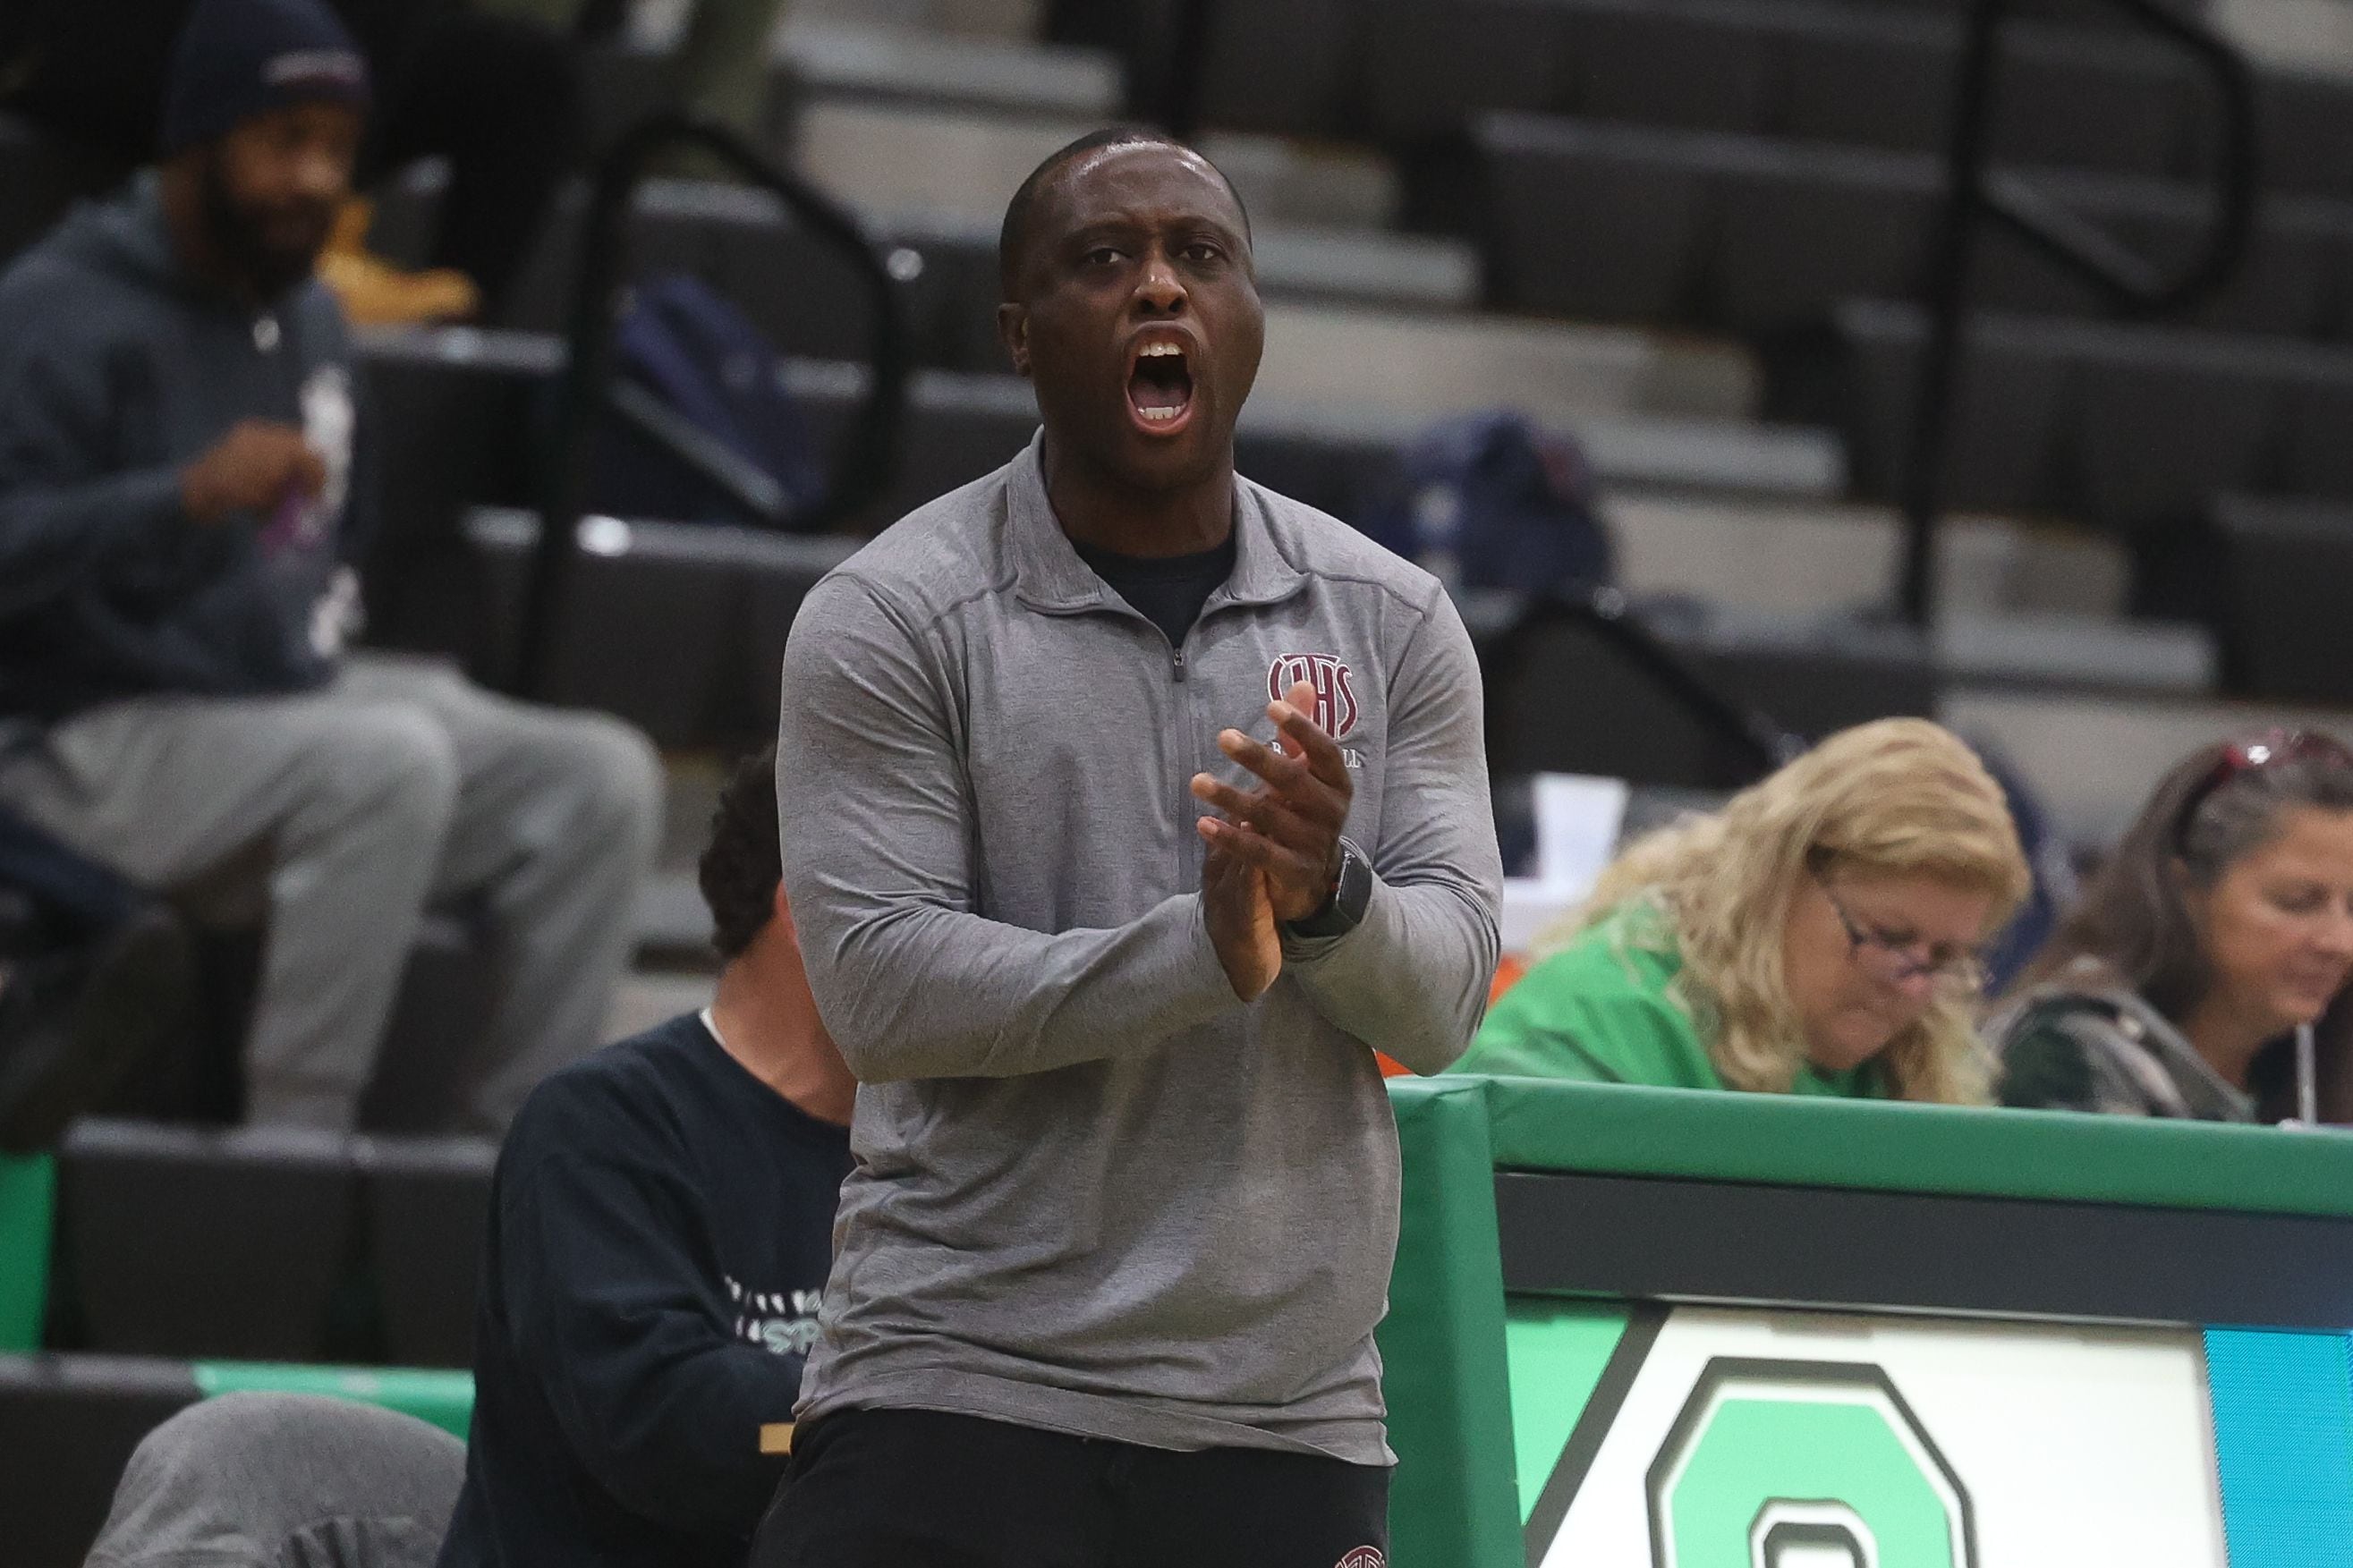 Lockport head coach Darien Jacobs reacts to a big play against Romeoville in the Oak Lawn Holiday Tournament championship on Saturday, Dec.16th in Oak Lawn.